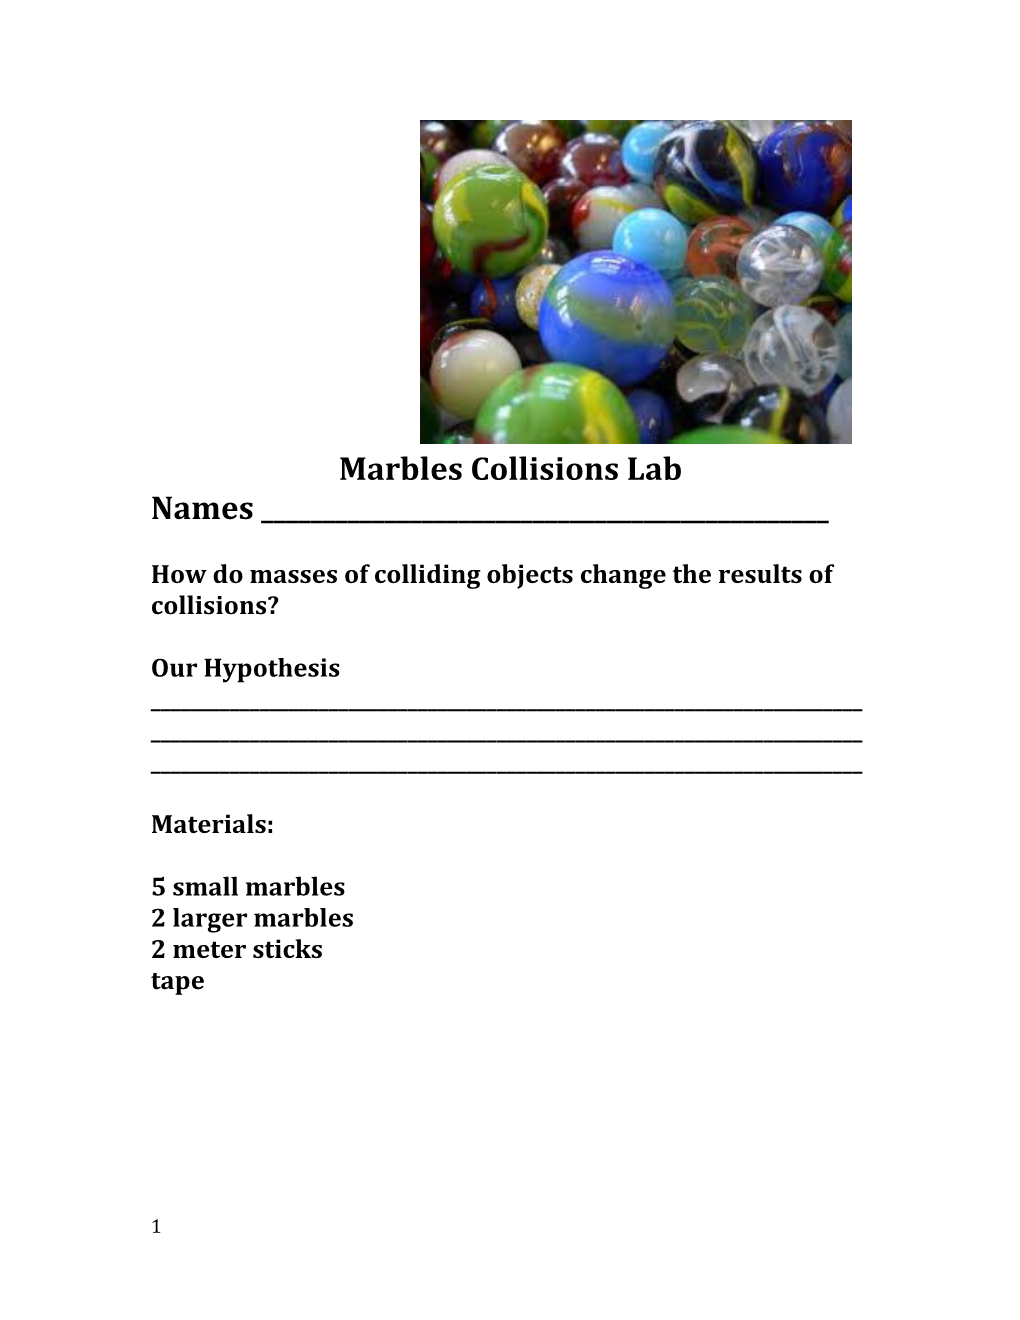 How Do Masses of Colliding Objects Change the Results of Collisions?